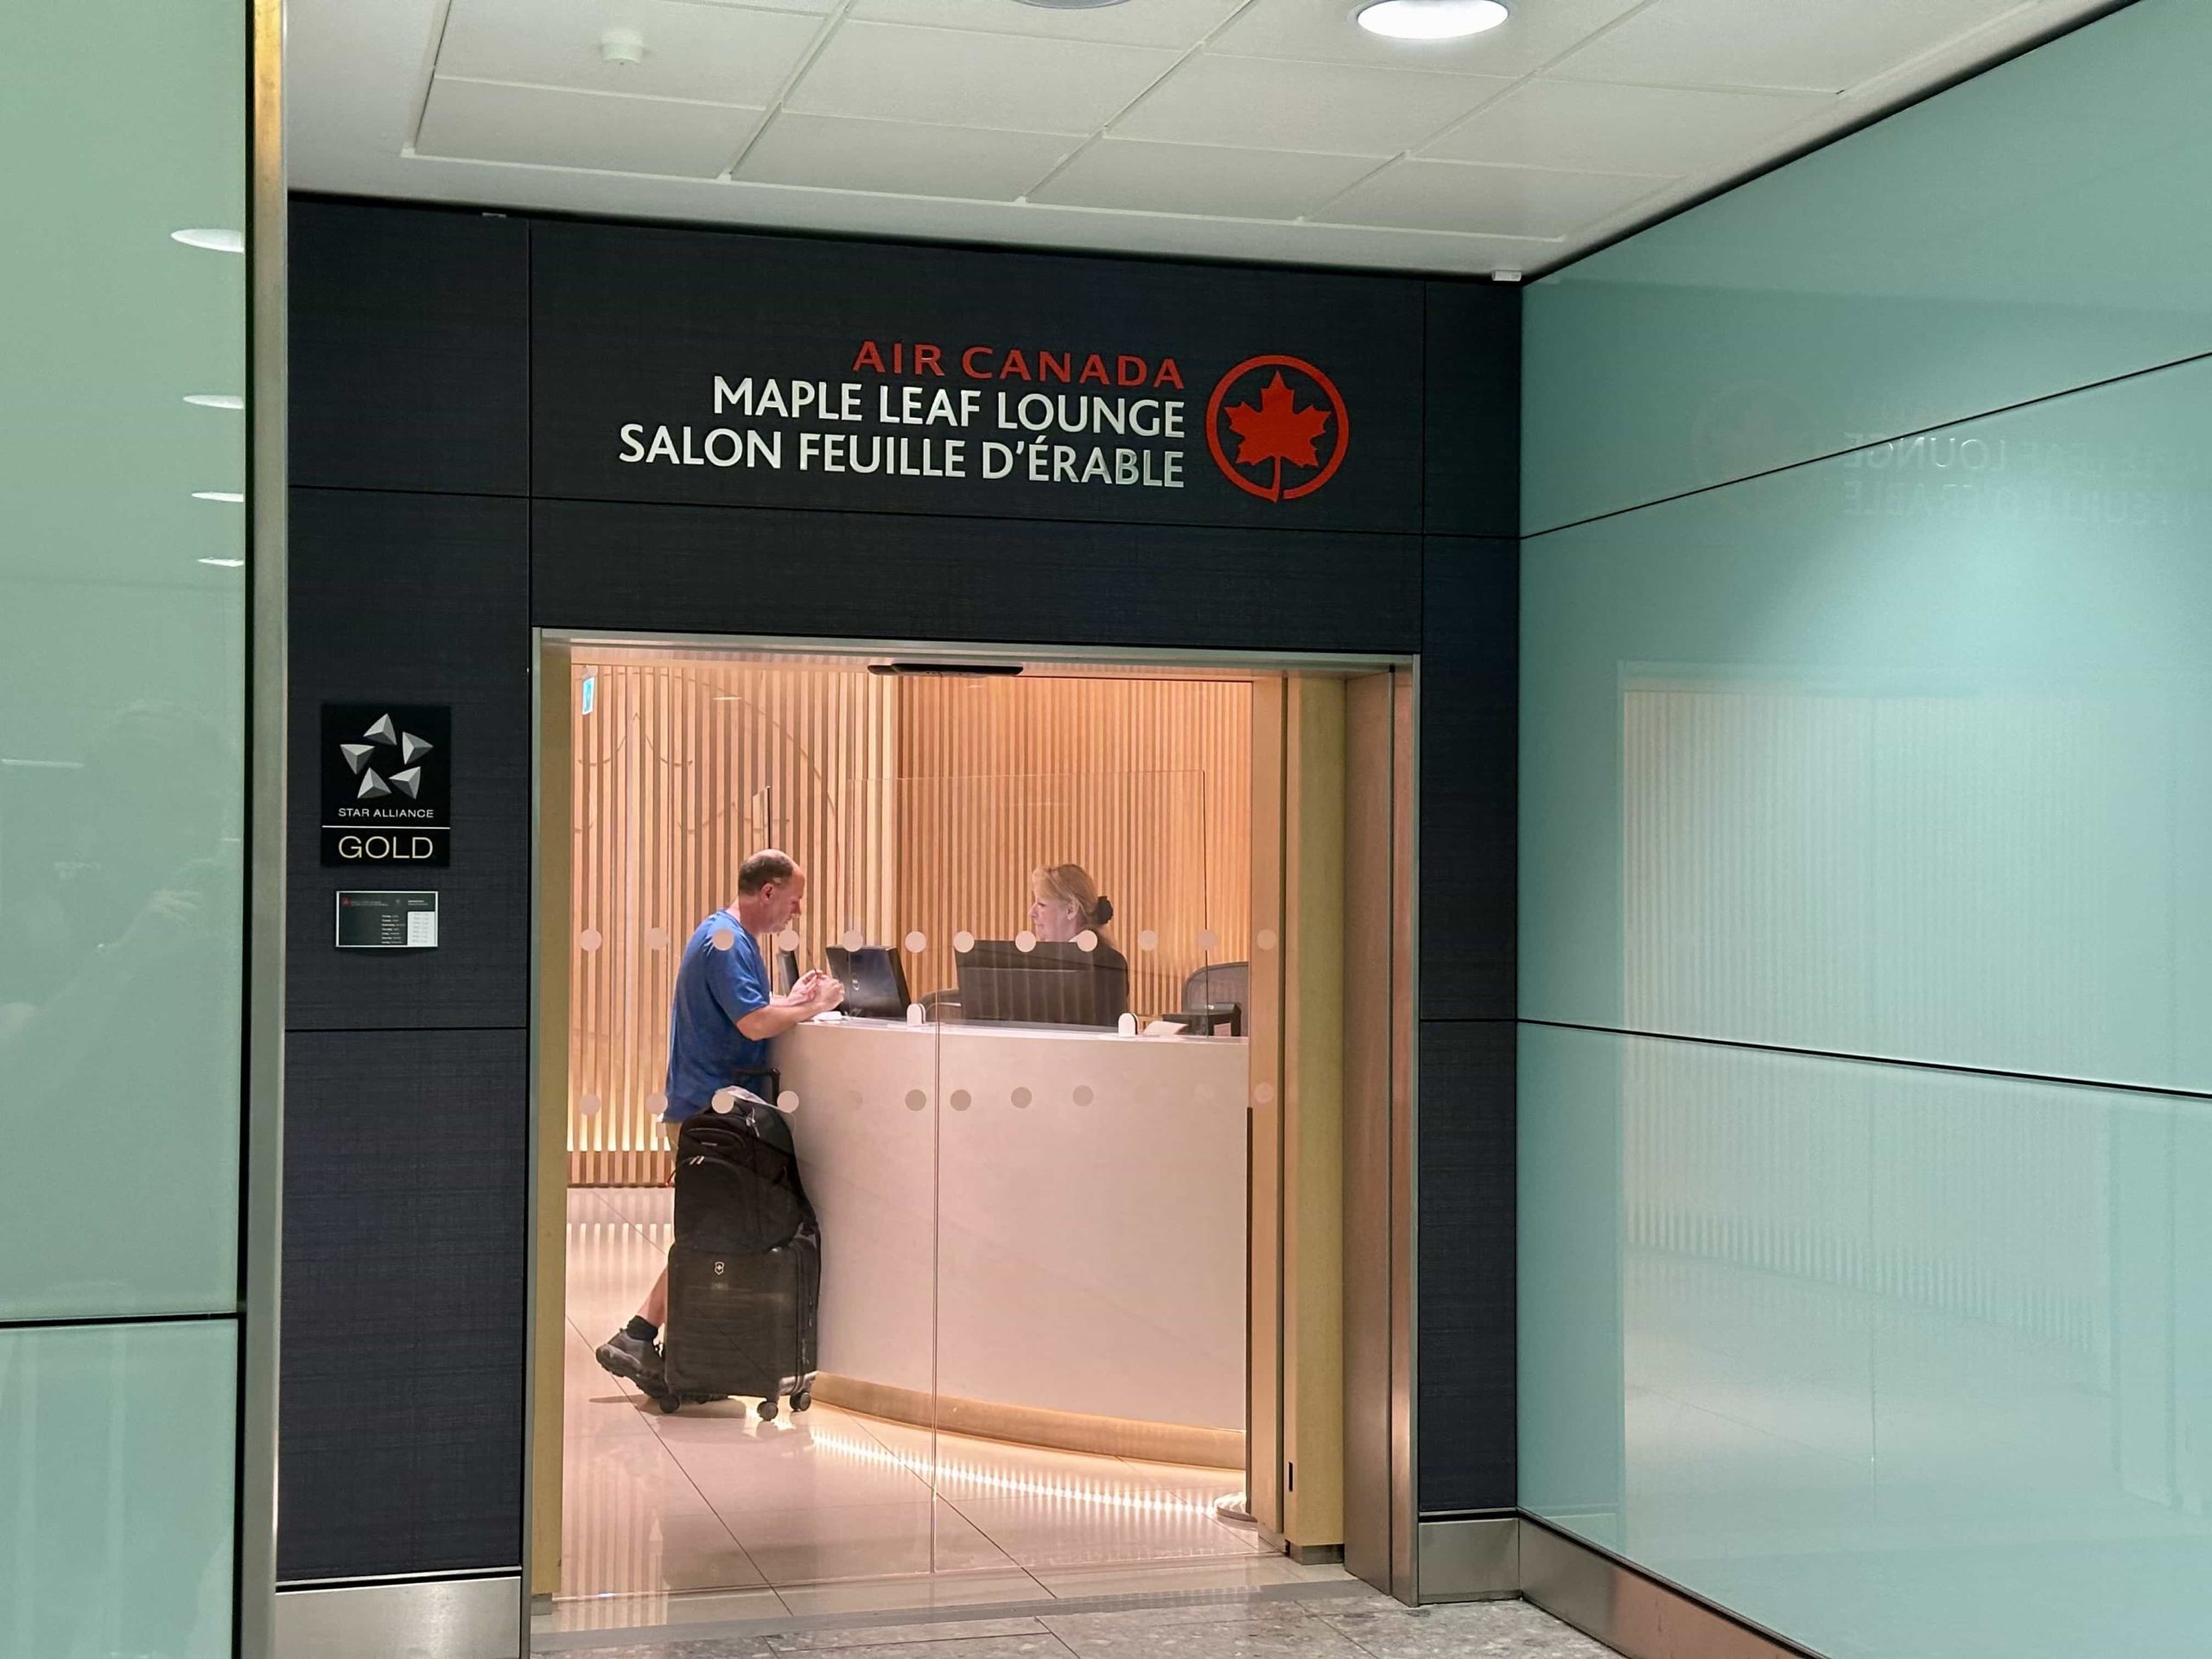 The entrance to Air Canada's Maple Leaf Lounge at Heathrow Terminal 2B